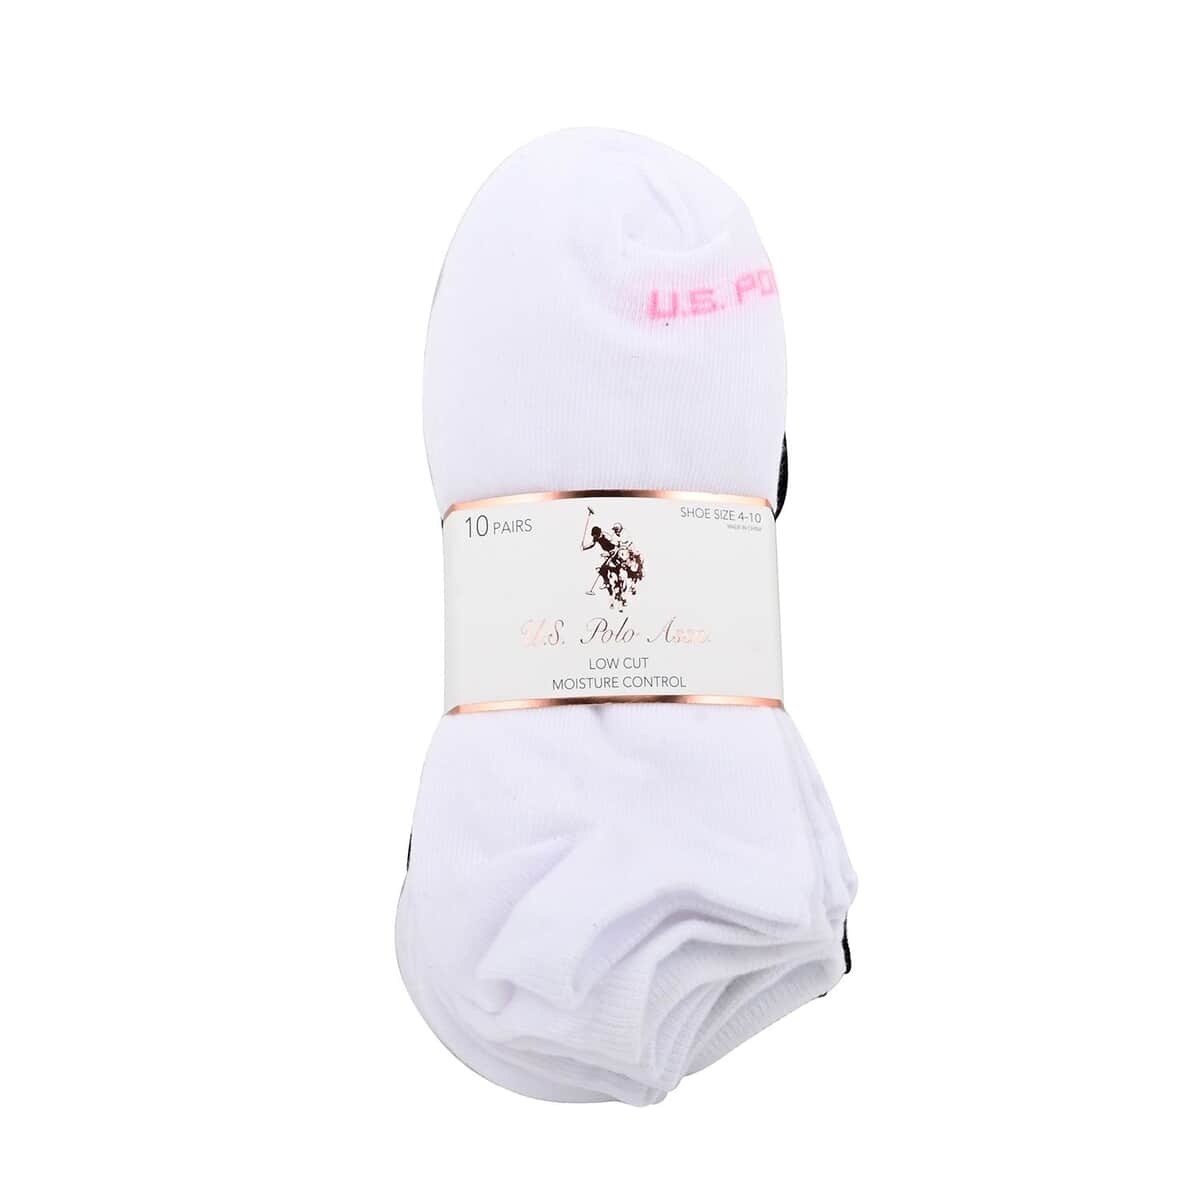 US POLO ASSN 10 Pairs Women's Low Cut Socks (Sizes 4-10) -White-Pink/Black image number 1